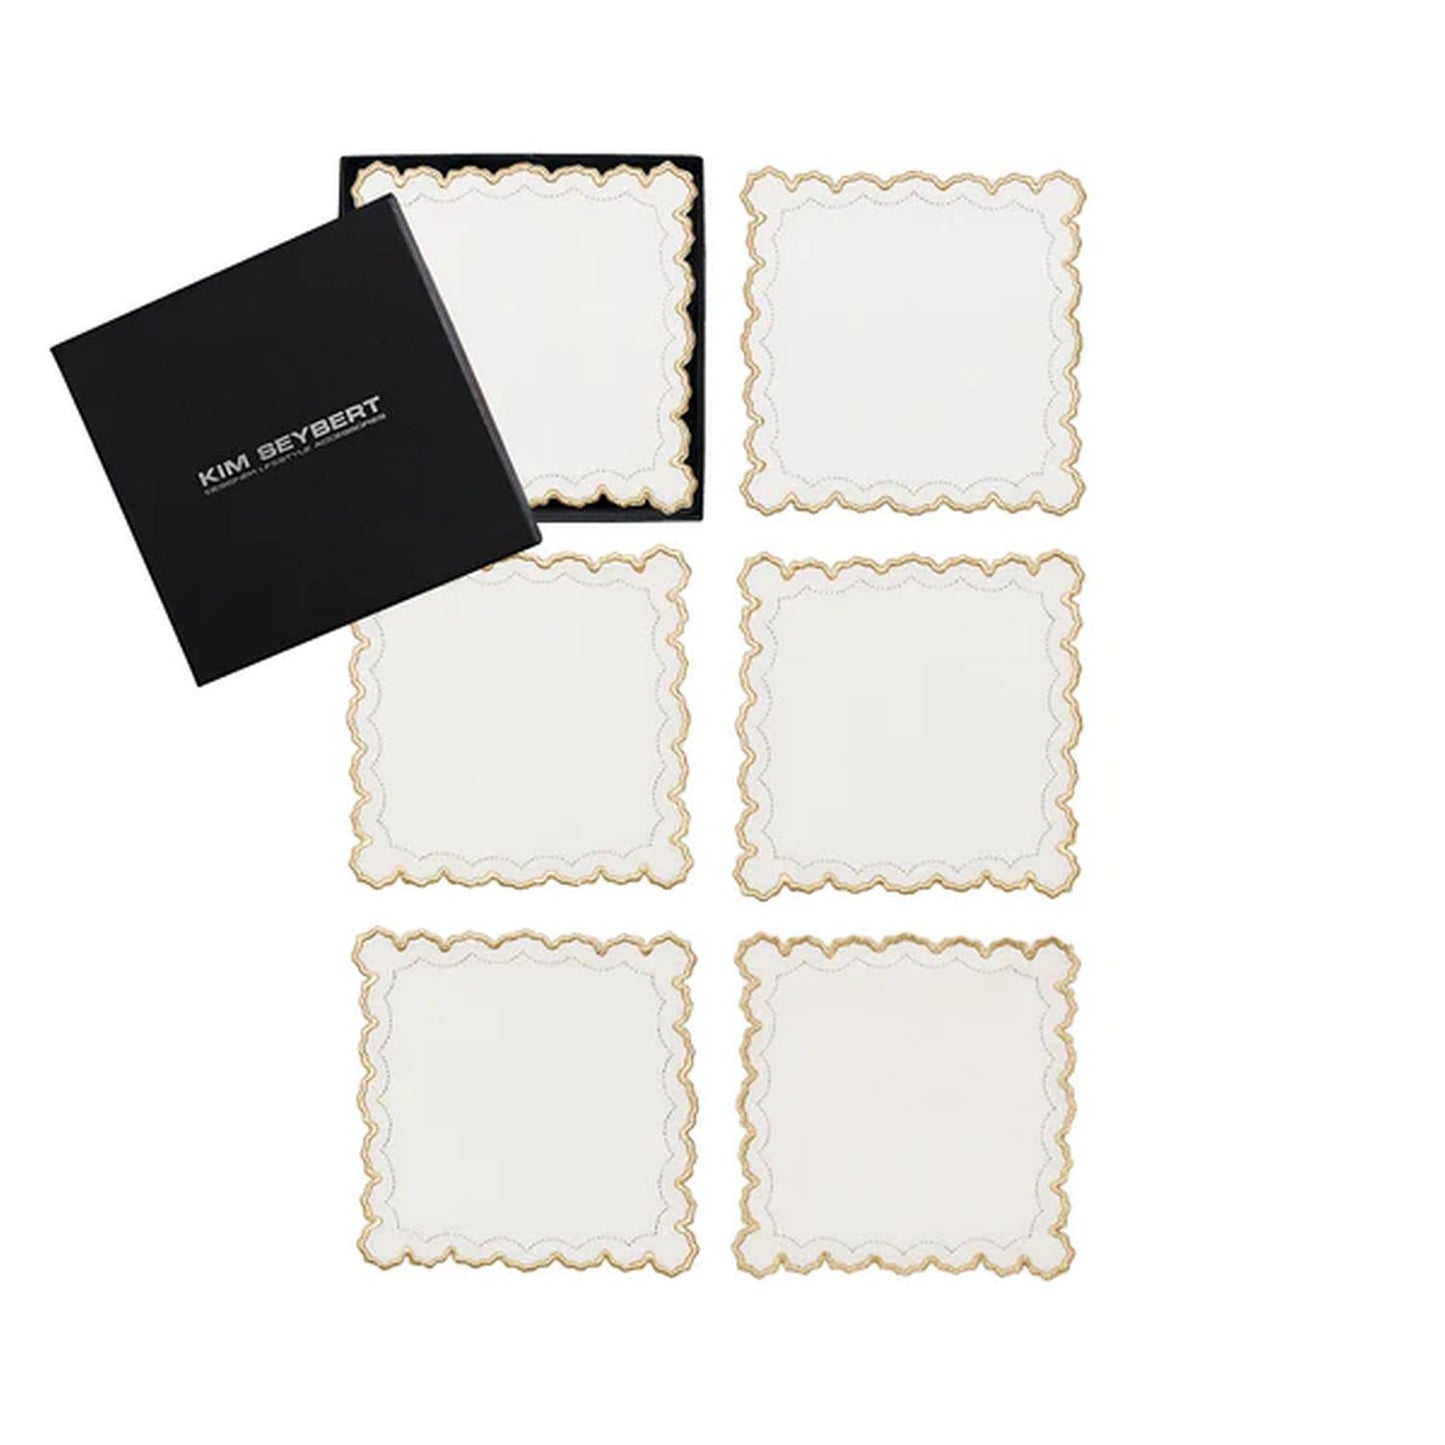 Kim Seybert Arches Cocktail Napkins in White, Gold & Silver, S/6  in Gift Box